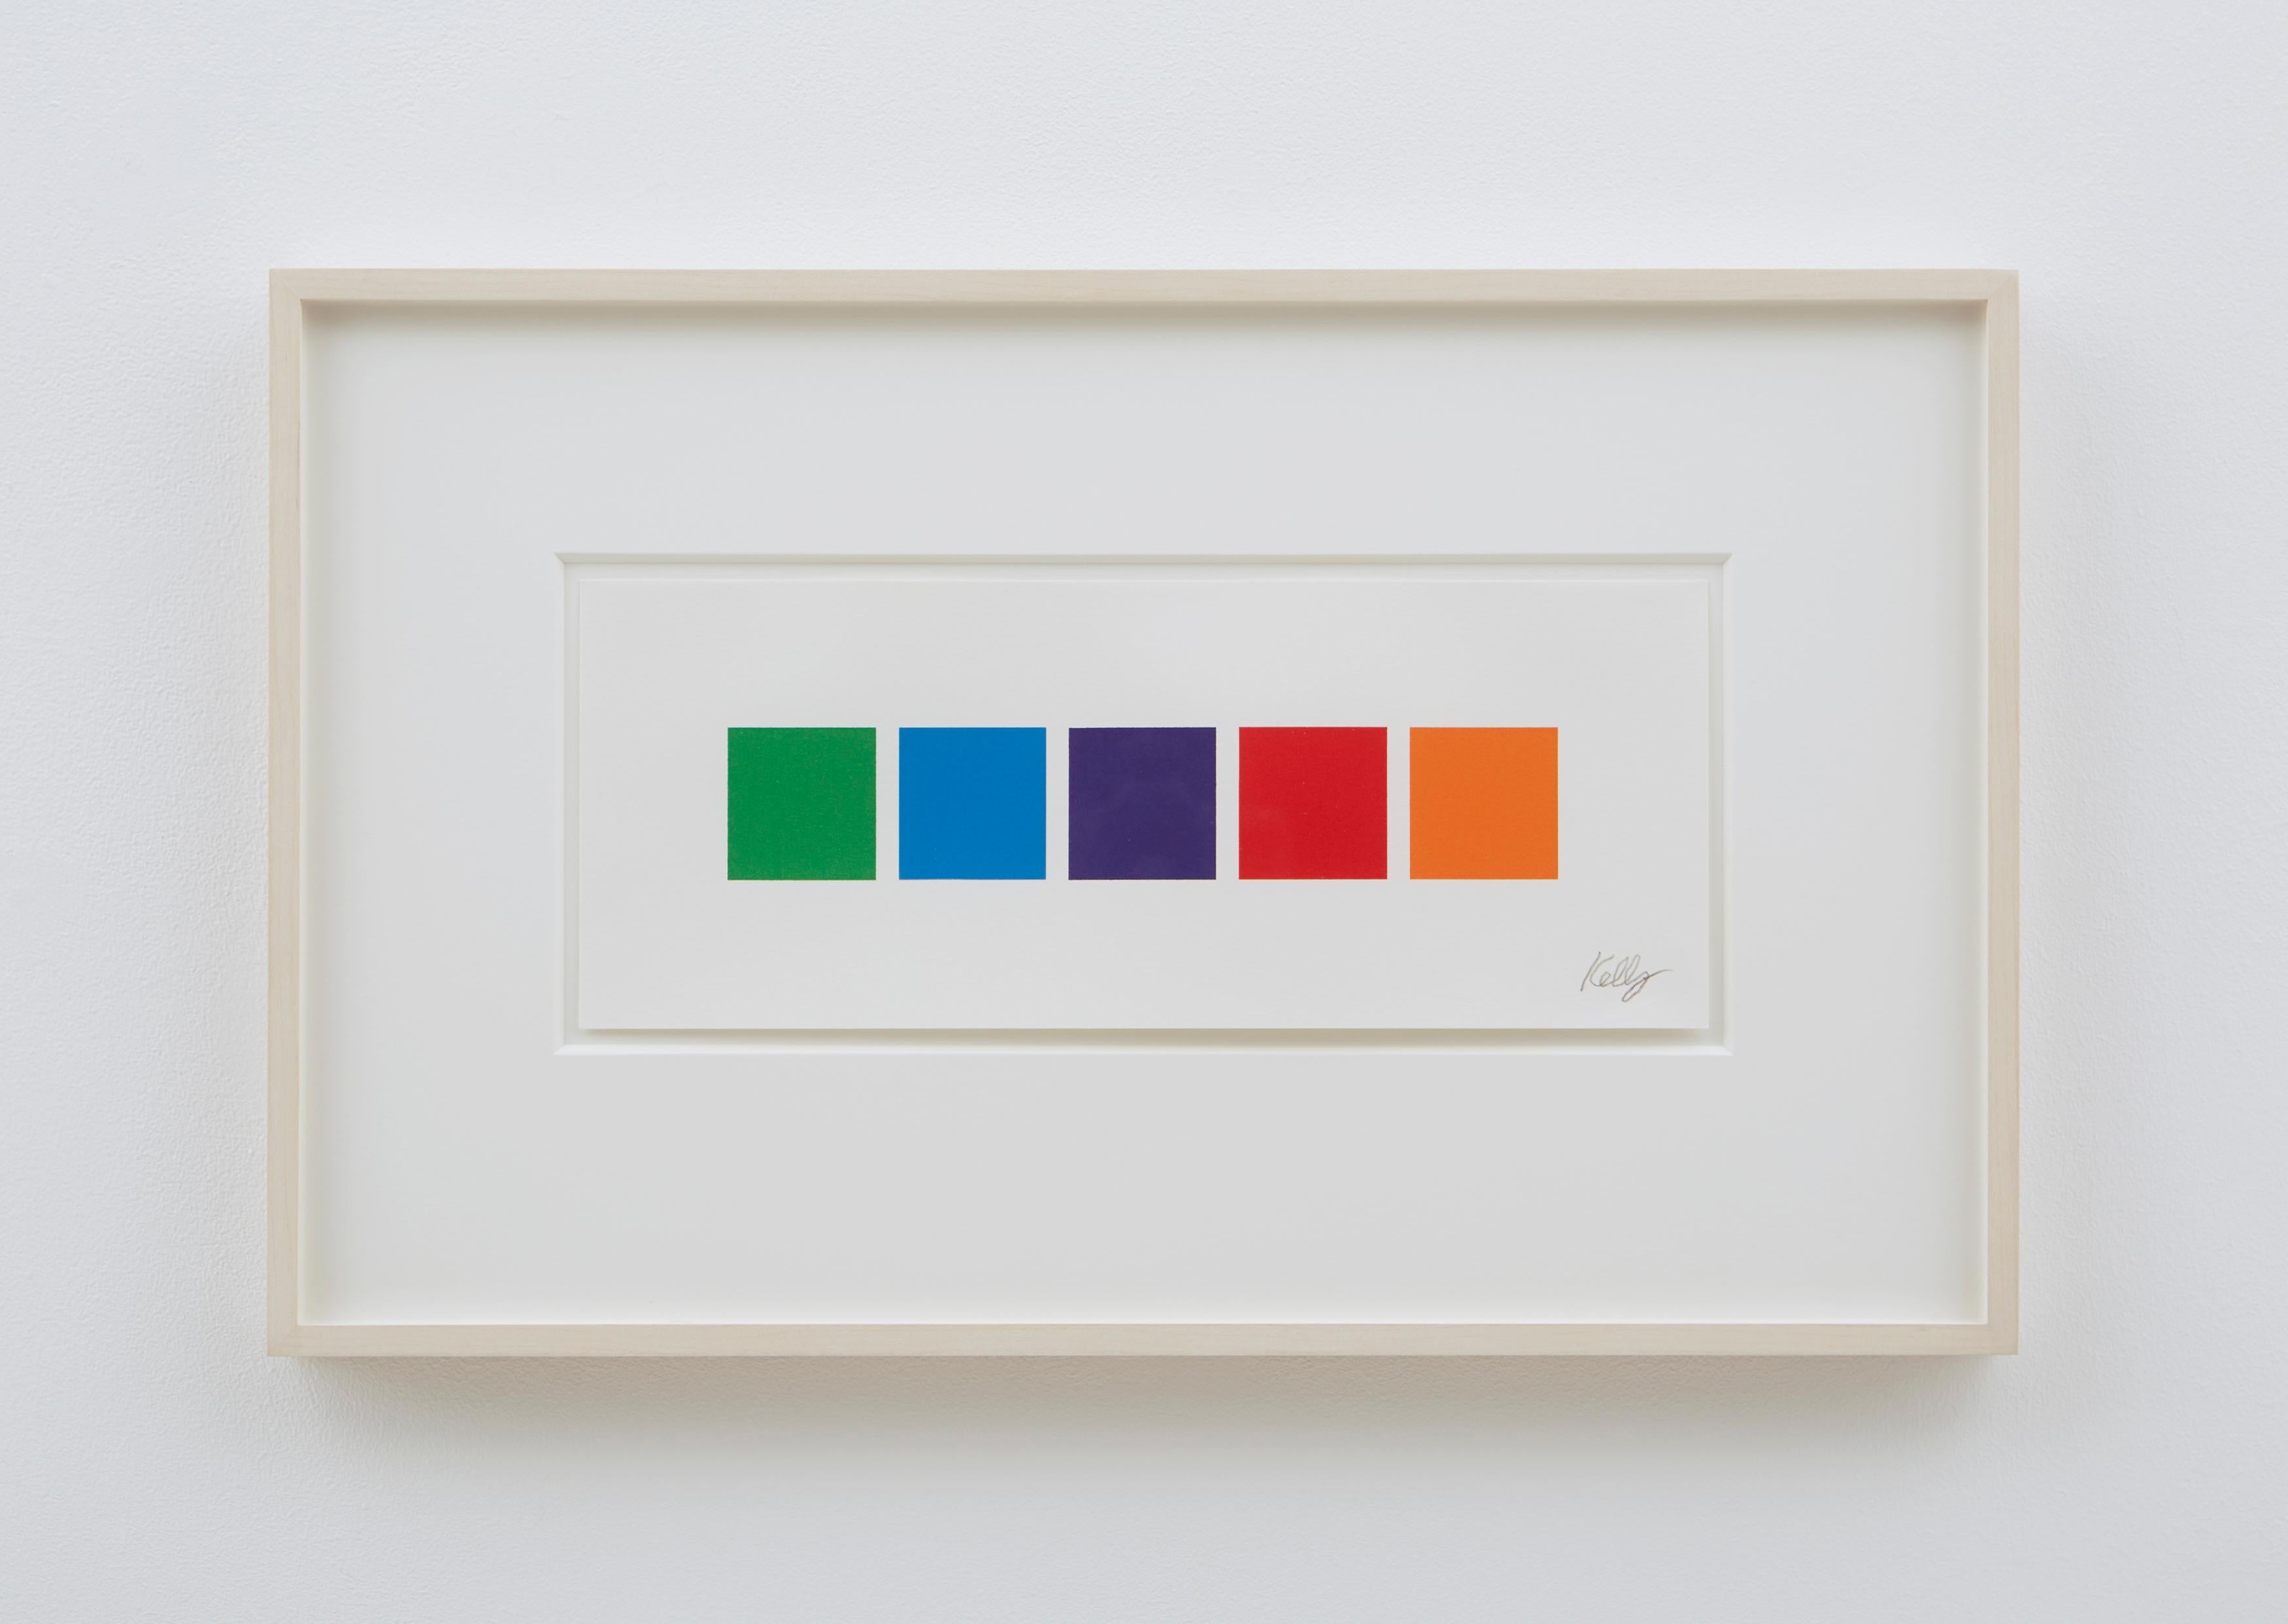 Five color lithograph
Edition of 60
Signed and numbered in graphite (lower right recto)
Frame: 12 3/4 x 20 1/2 inches; 32 x 52 cm

Available from Matthew Marks Gallery, New York and Los Angeles